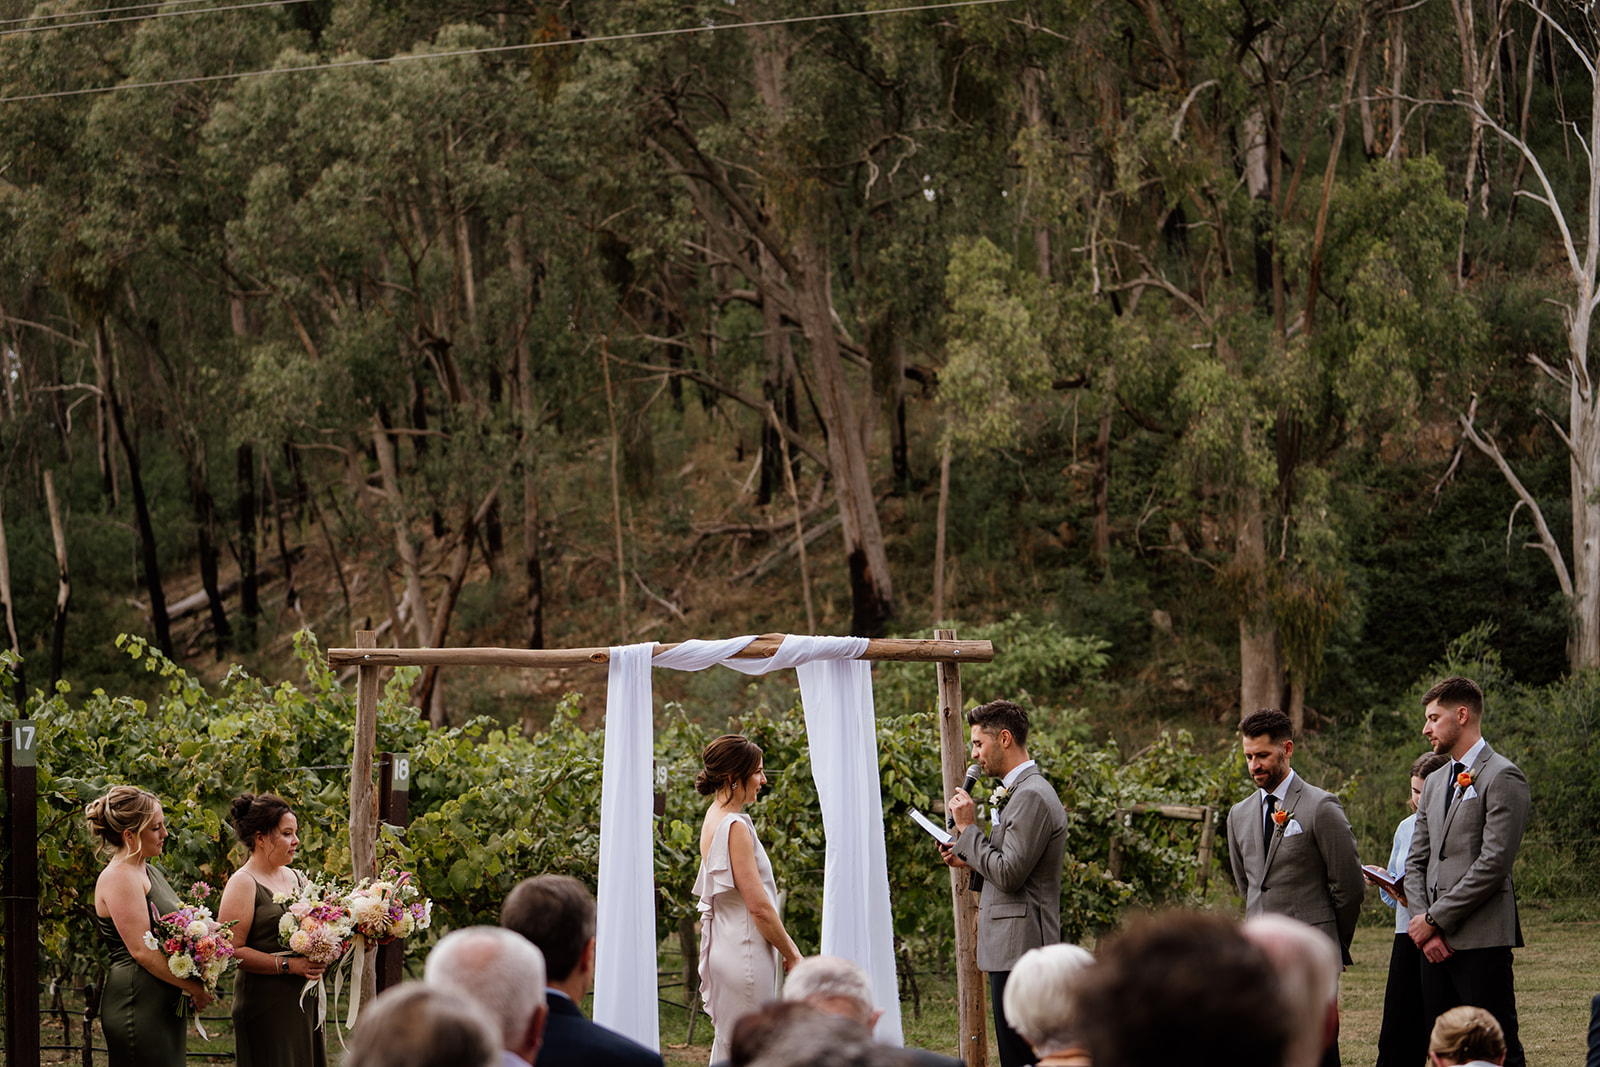 Wedding ceremony amongst the gum trees and vineyards at Politini Wines. Outdoor wedding ceremony at Politini Wines.